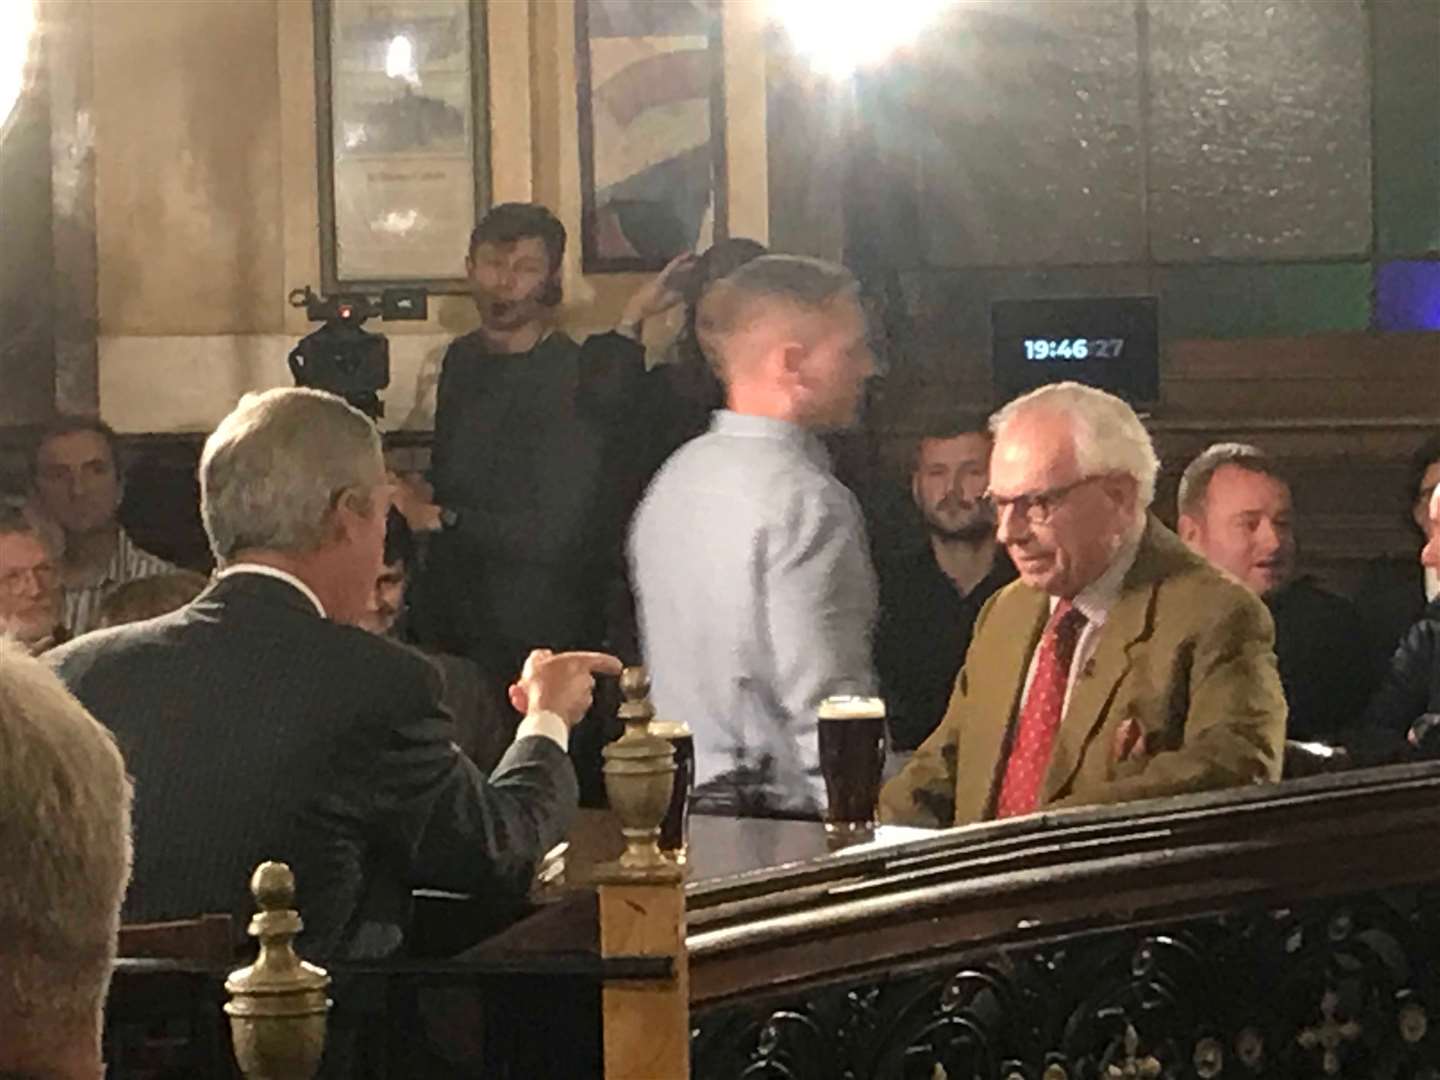 Nigel Farage and David Starkey prepare to go live on air over a pint